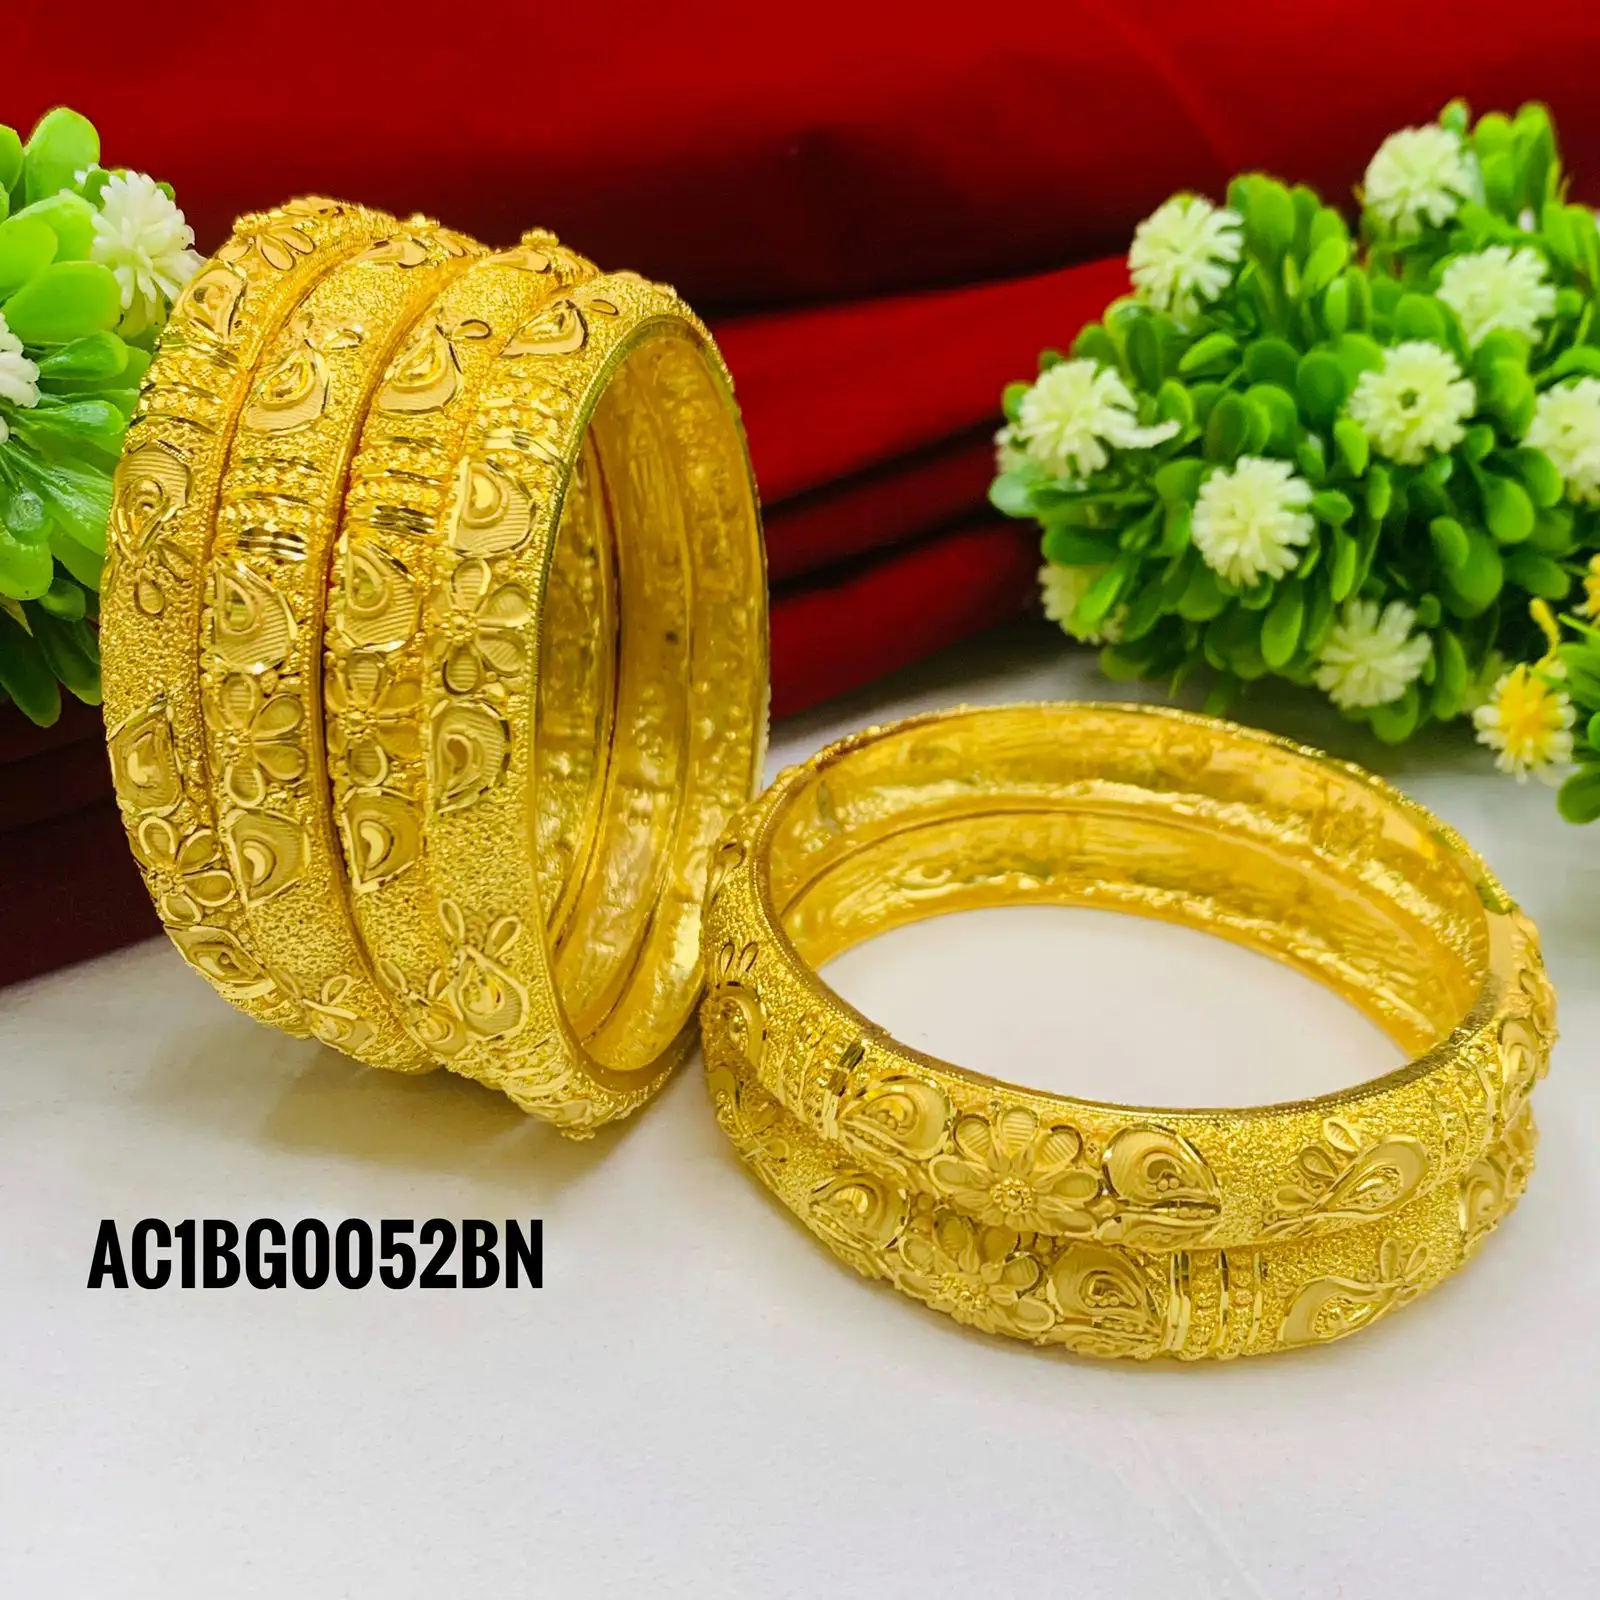 New Design 24K Gold Plated Jewelry 6 pcs Bangle for Woman 2021